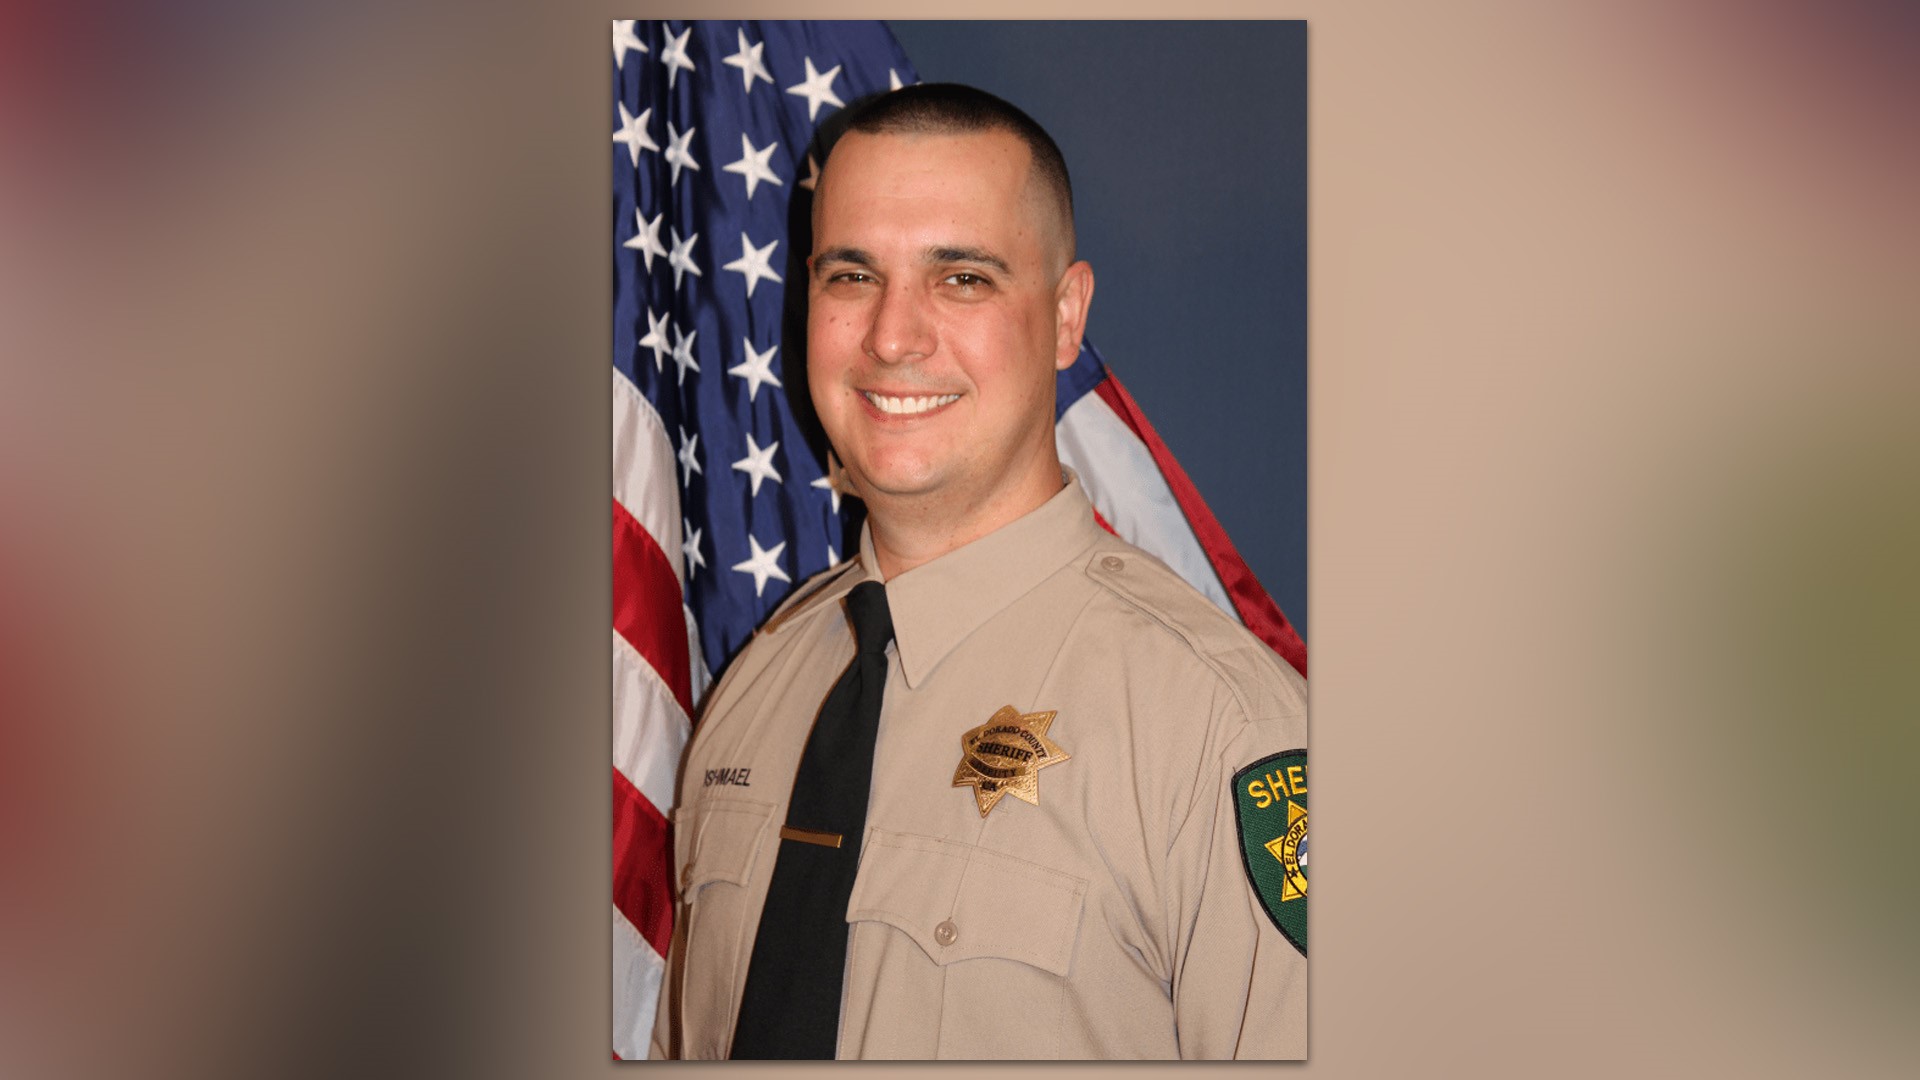 The El Dorado County Sheriff's office shared more details about the shooting death of Deputy Brian Ishmael. An off-duty officer with San Joaquin County was also shot